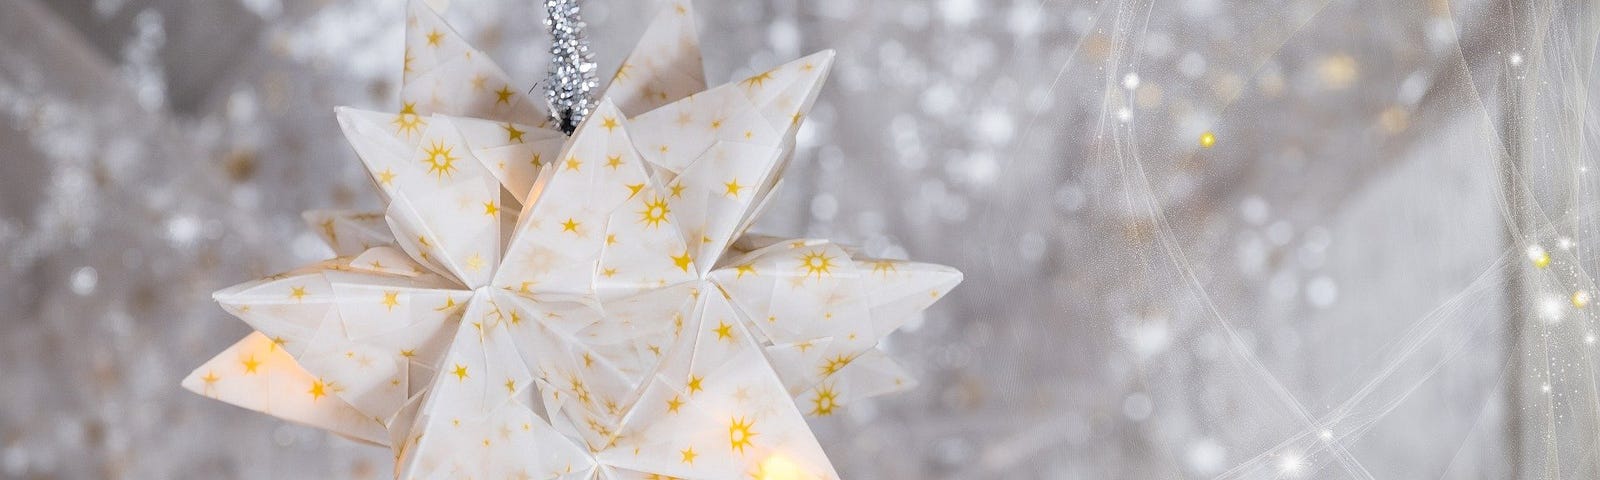 A gold and white paper star hanging in front of a background of silver stars